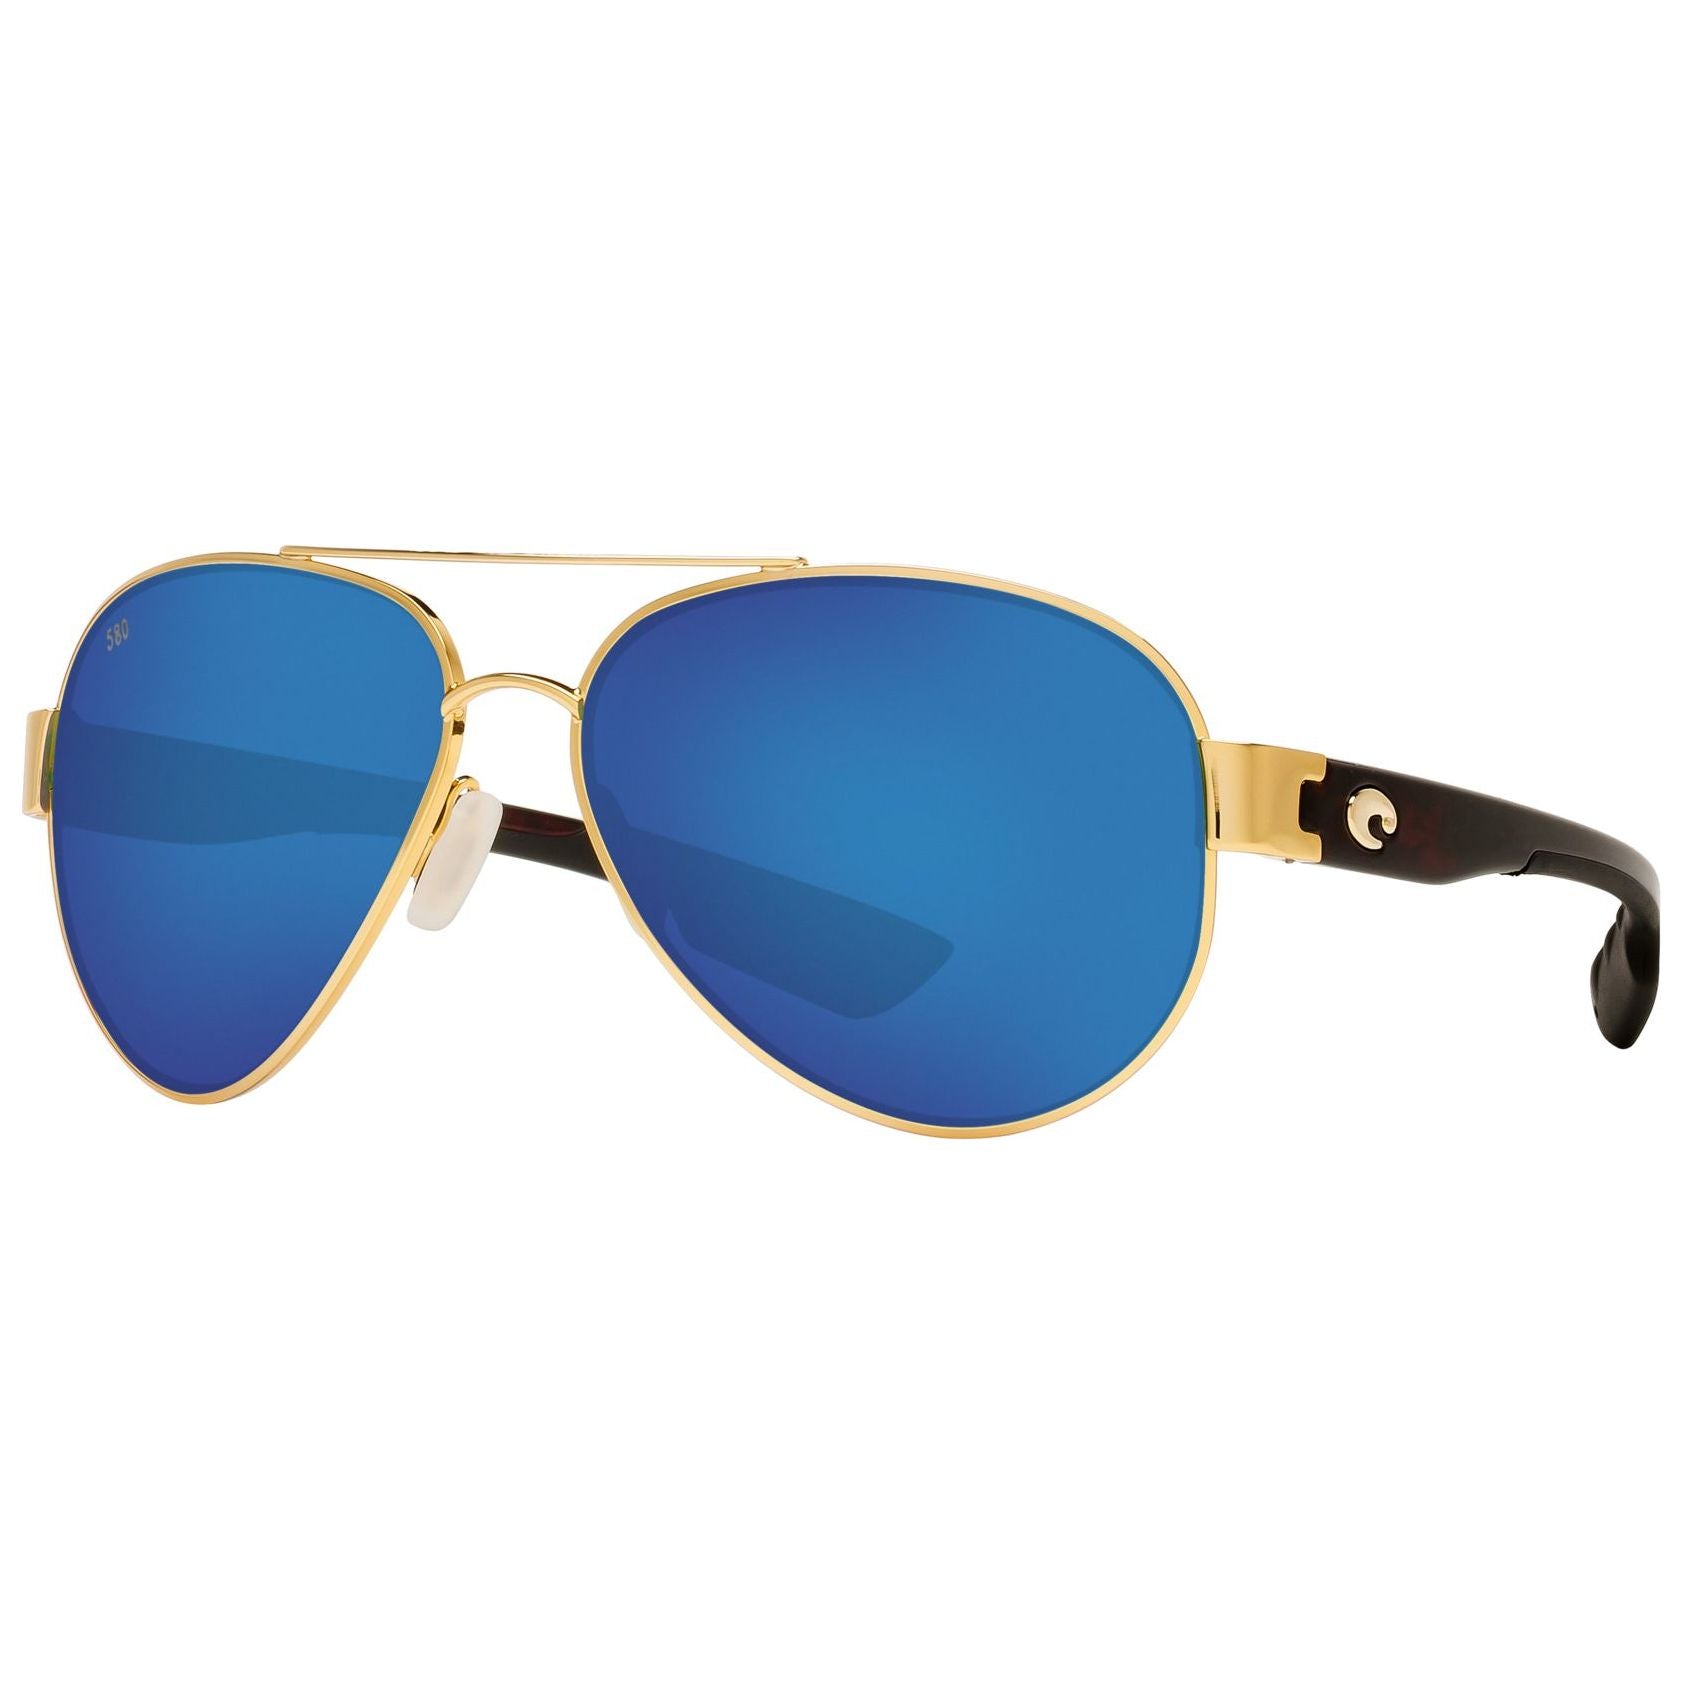 South Point Polarized Sunglasses in Blue Mirror